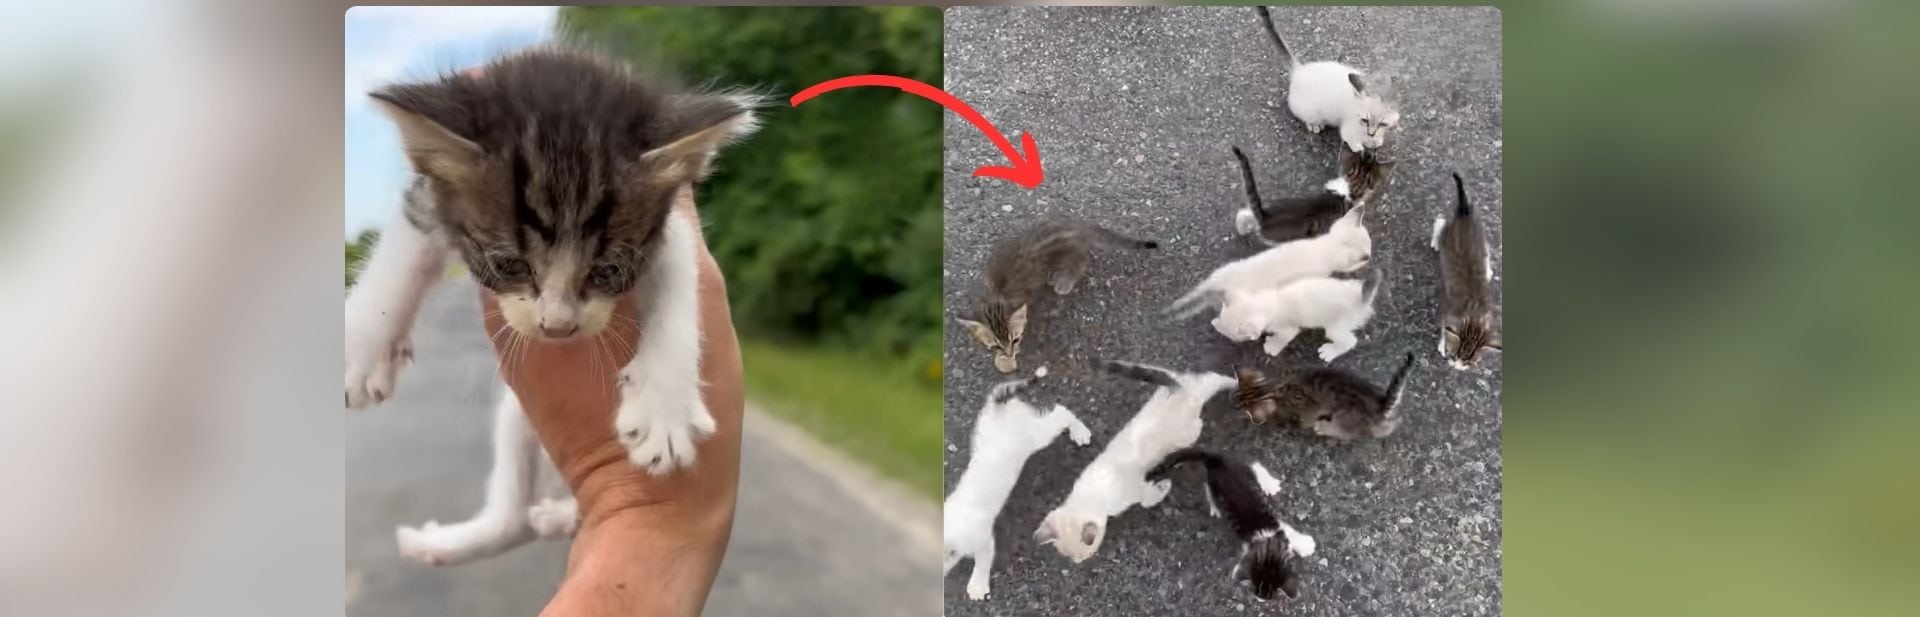 Louisiana Man Stops to Save One Kitten, Ends Up Rescuing a Dozen More in Heartwarming Viral Video